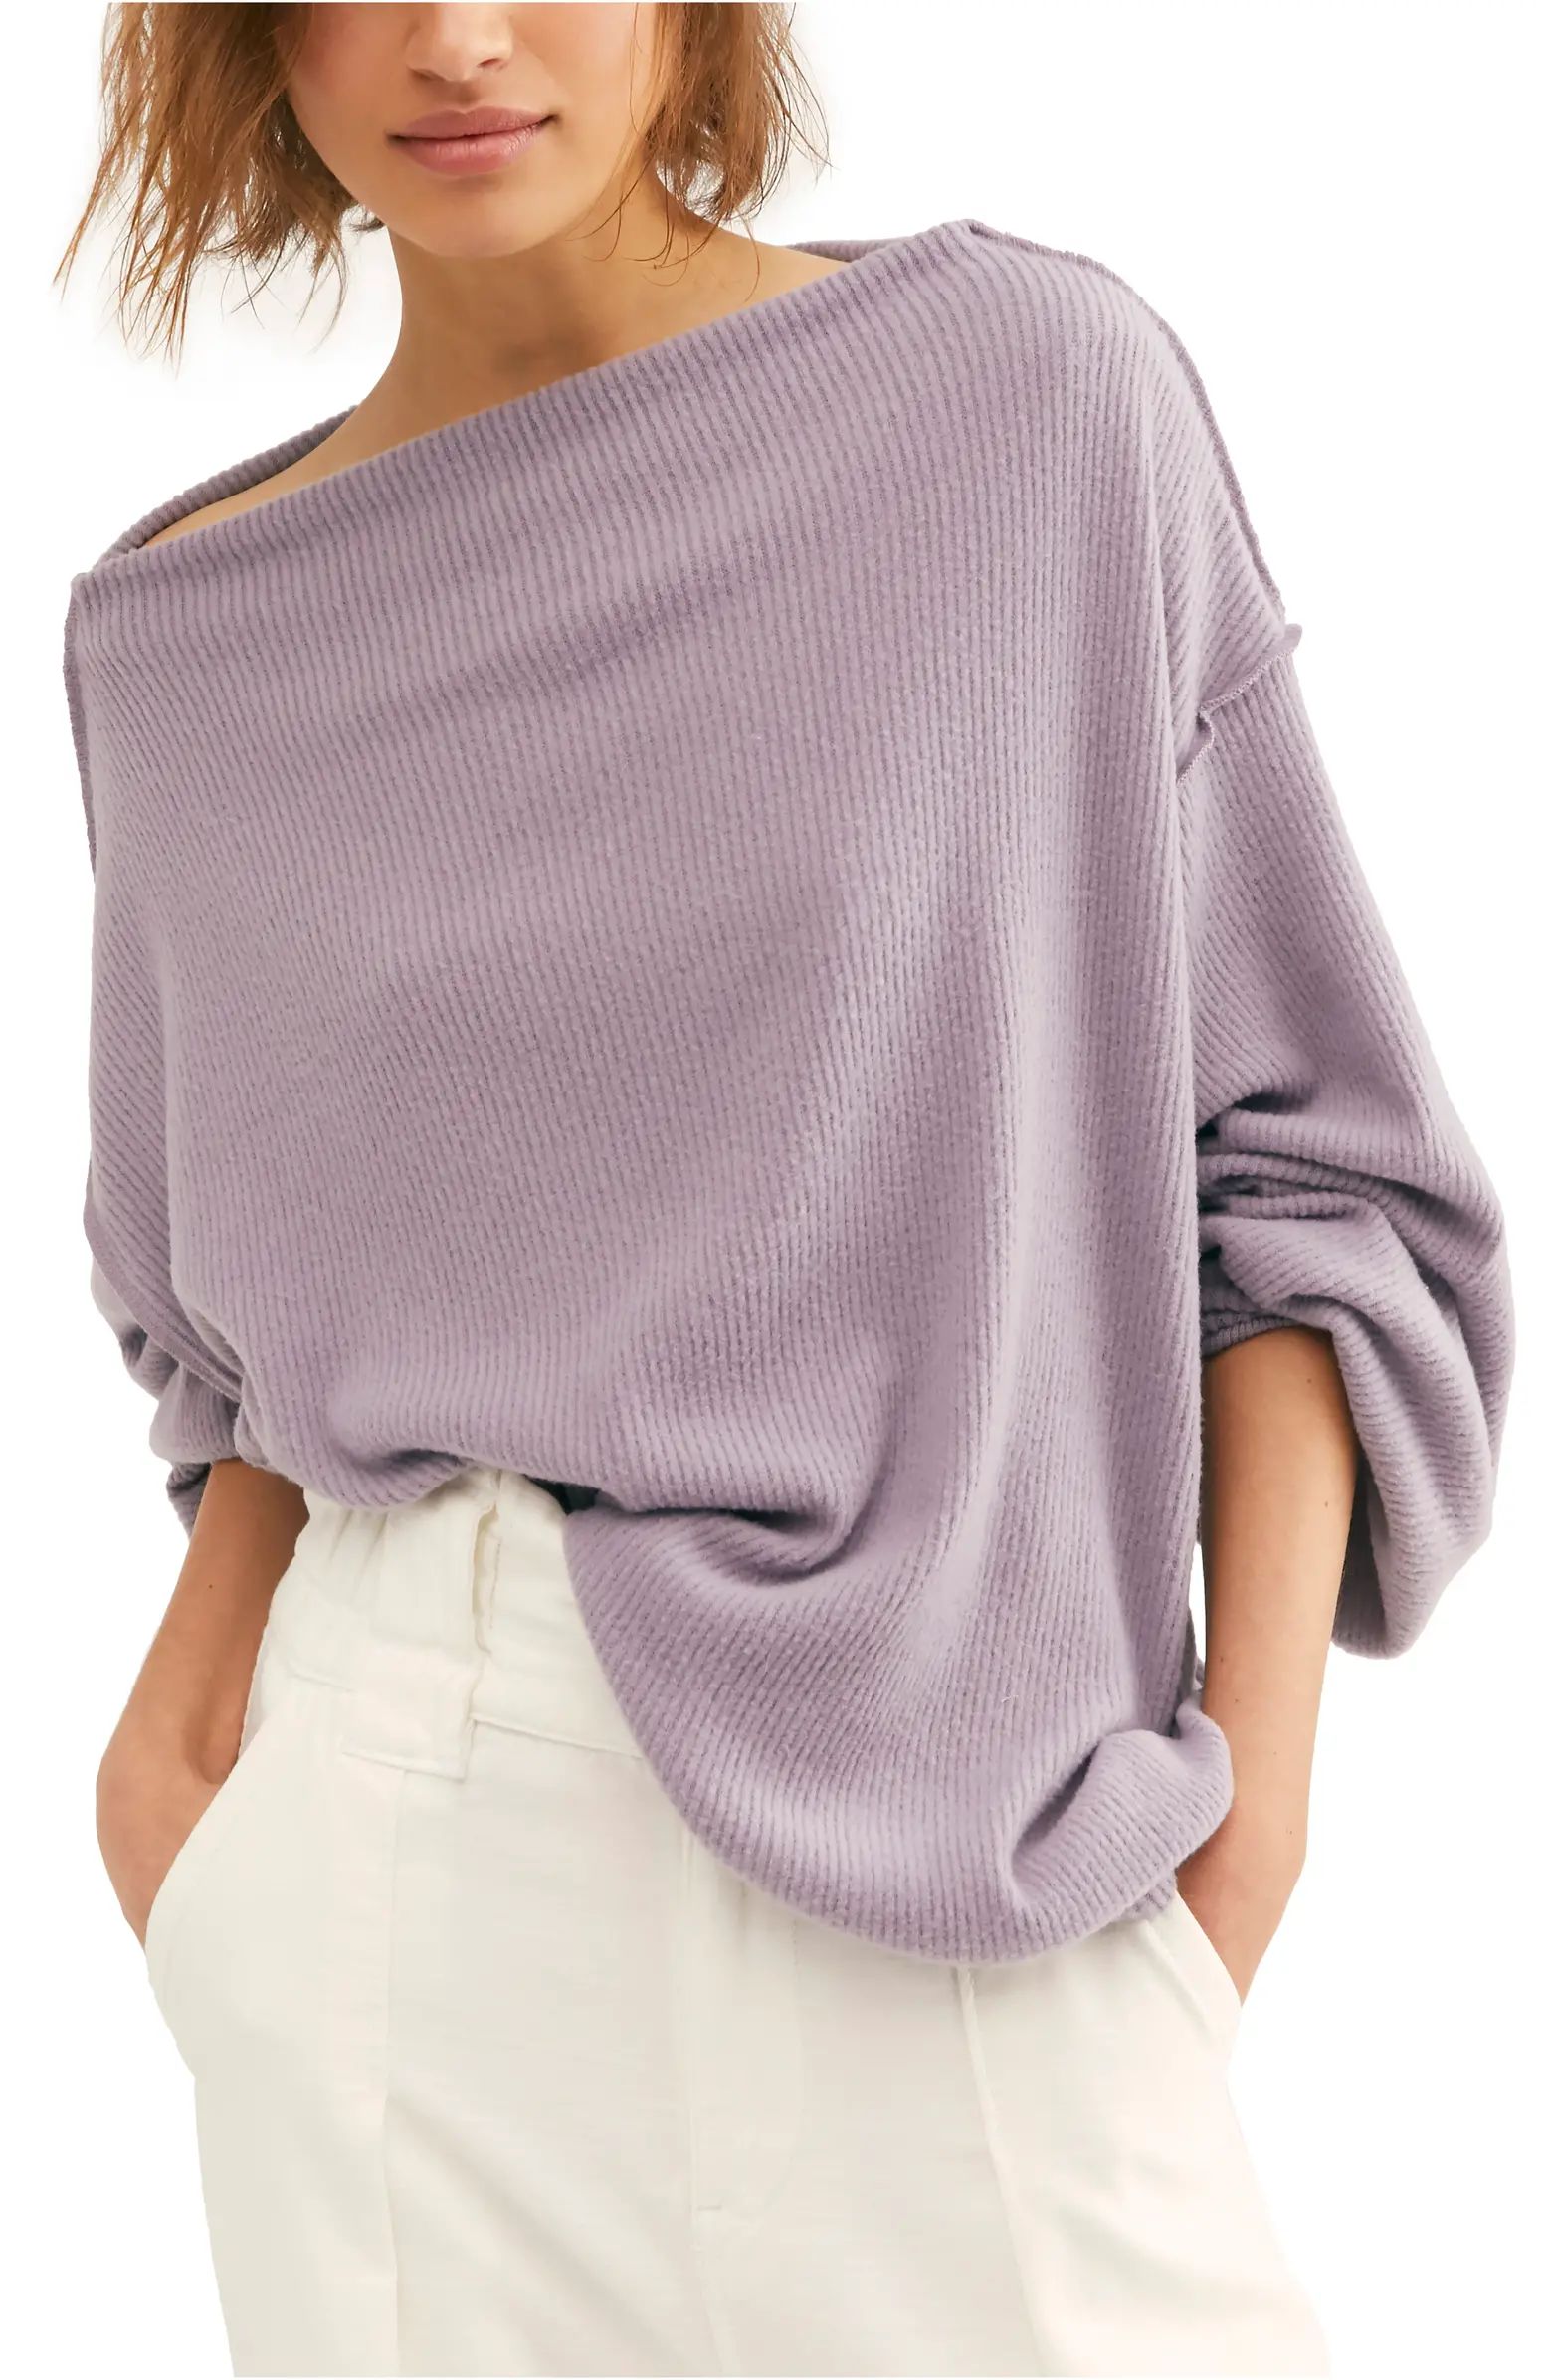 Main Squeeze Hacci Sweater | Nordstrom